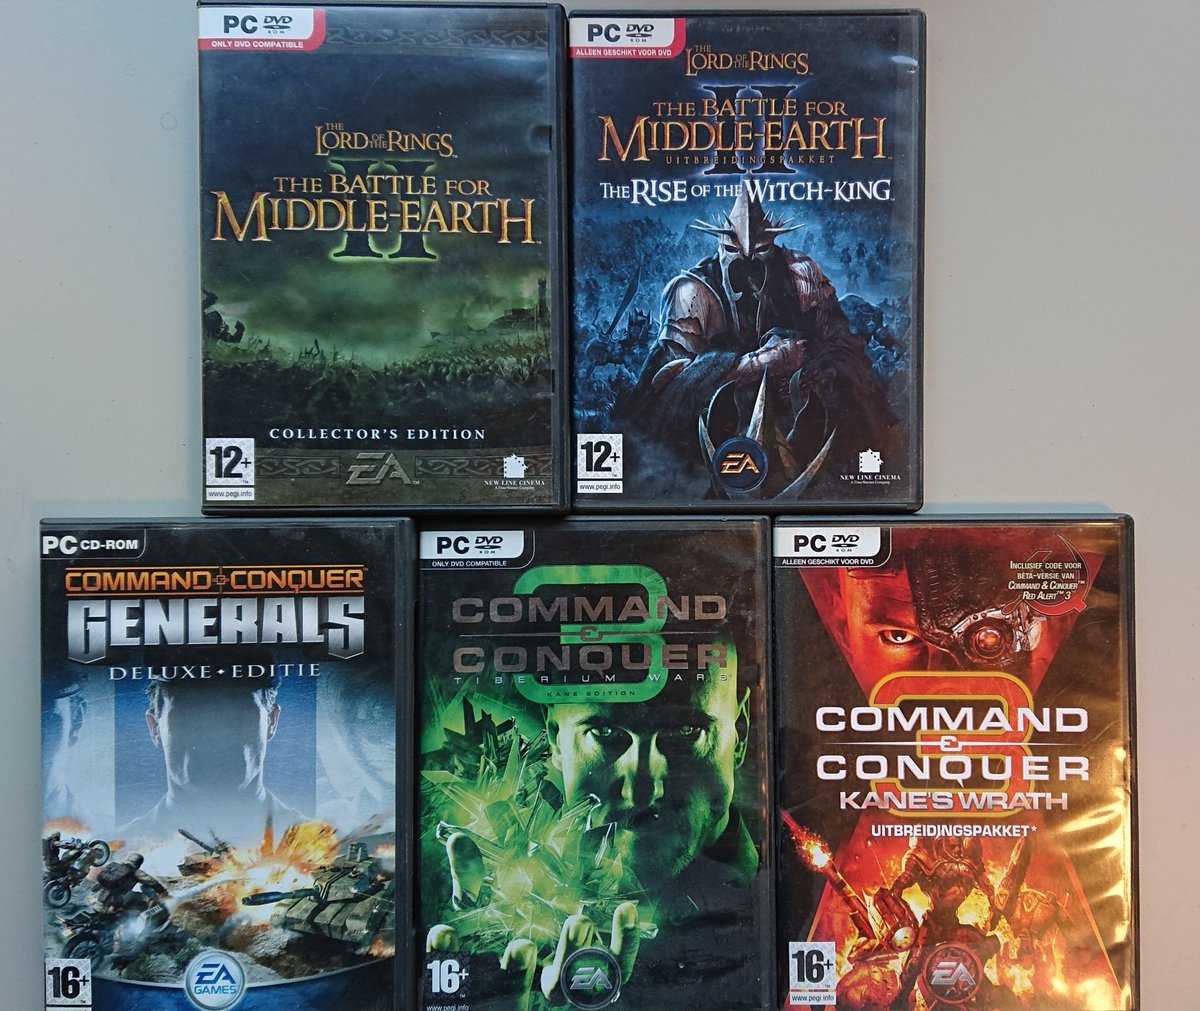 I love these games and the game boxes so much❤.

I never gonna sell these games. These are peak gaming memories from my personal teenage gaming history.

#LordOfTheRings #CommandandConquer
#Videogames
#GamersUnite 
#PCgaming